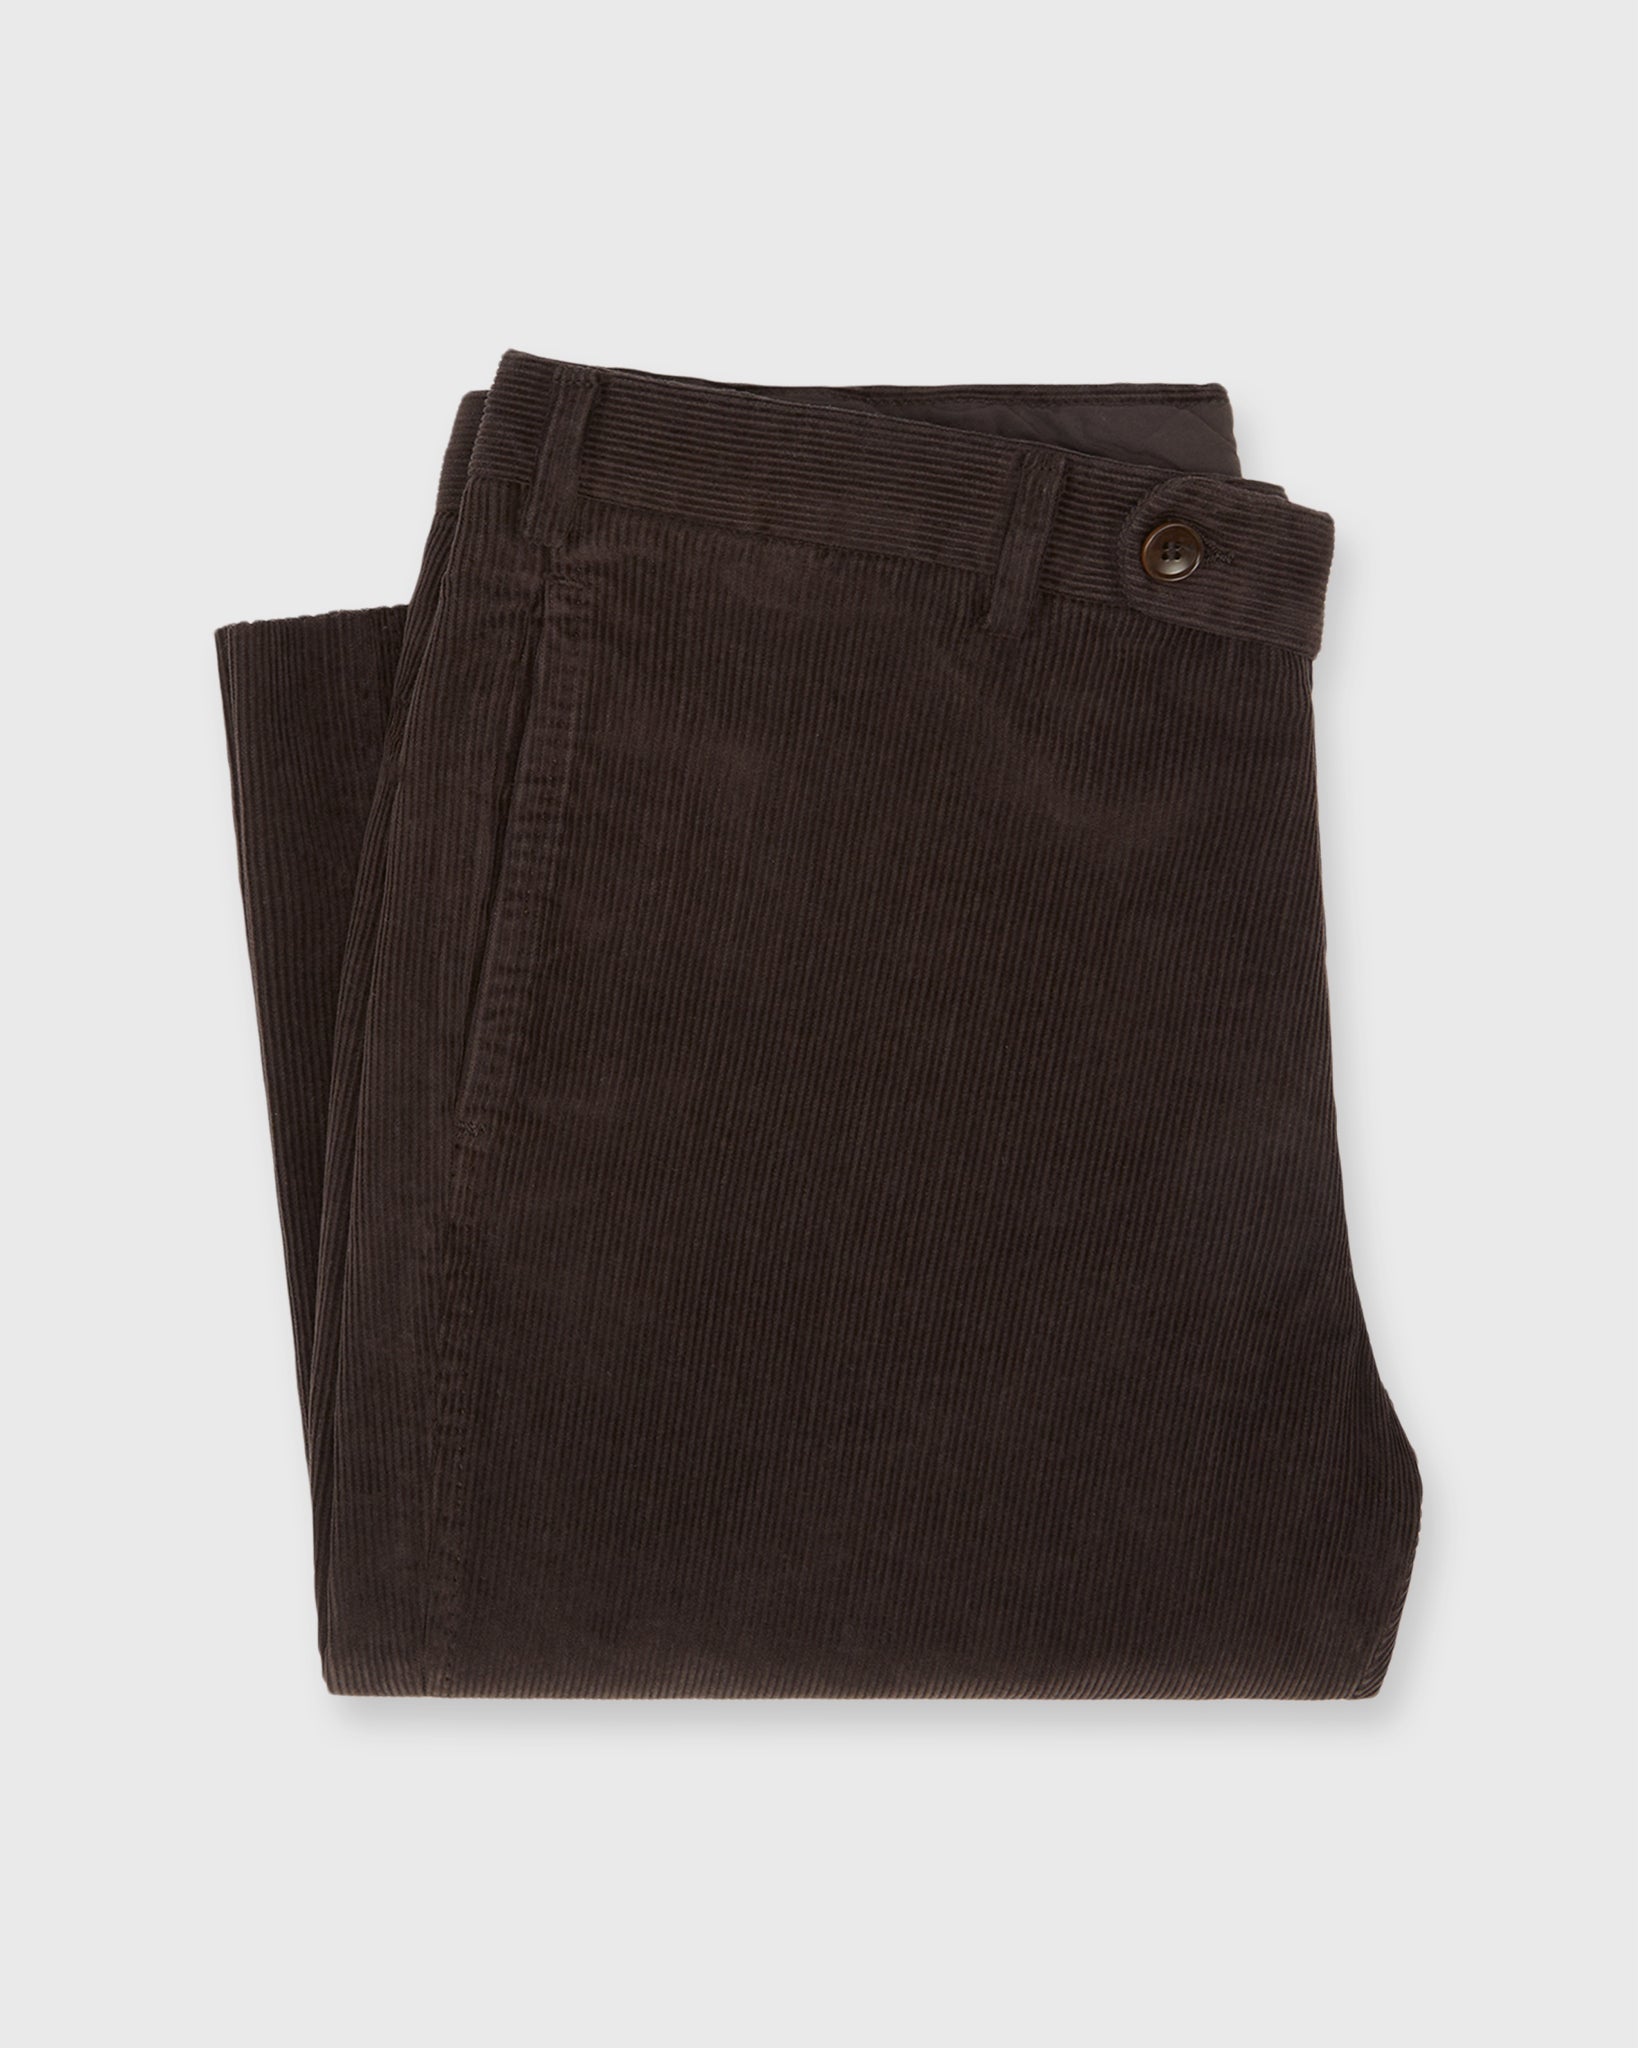 Garment-Dyed Sport Trouser in Chocolate Corduroy